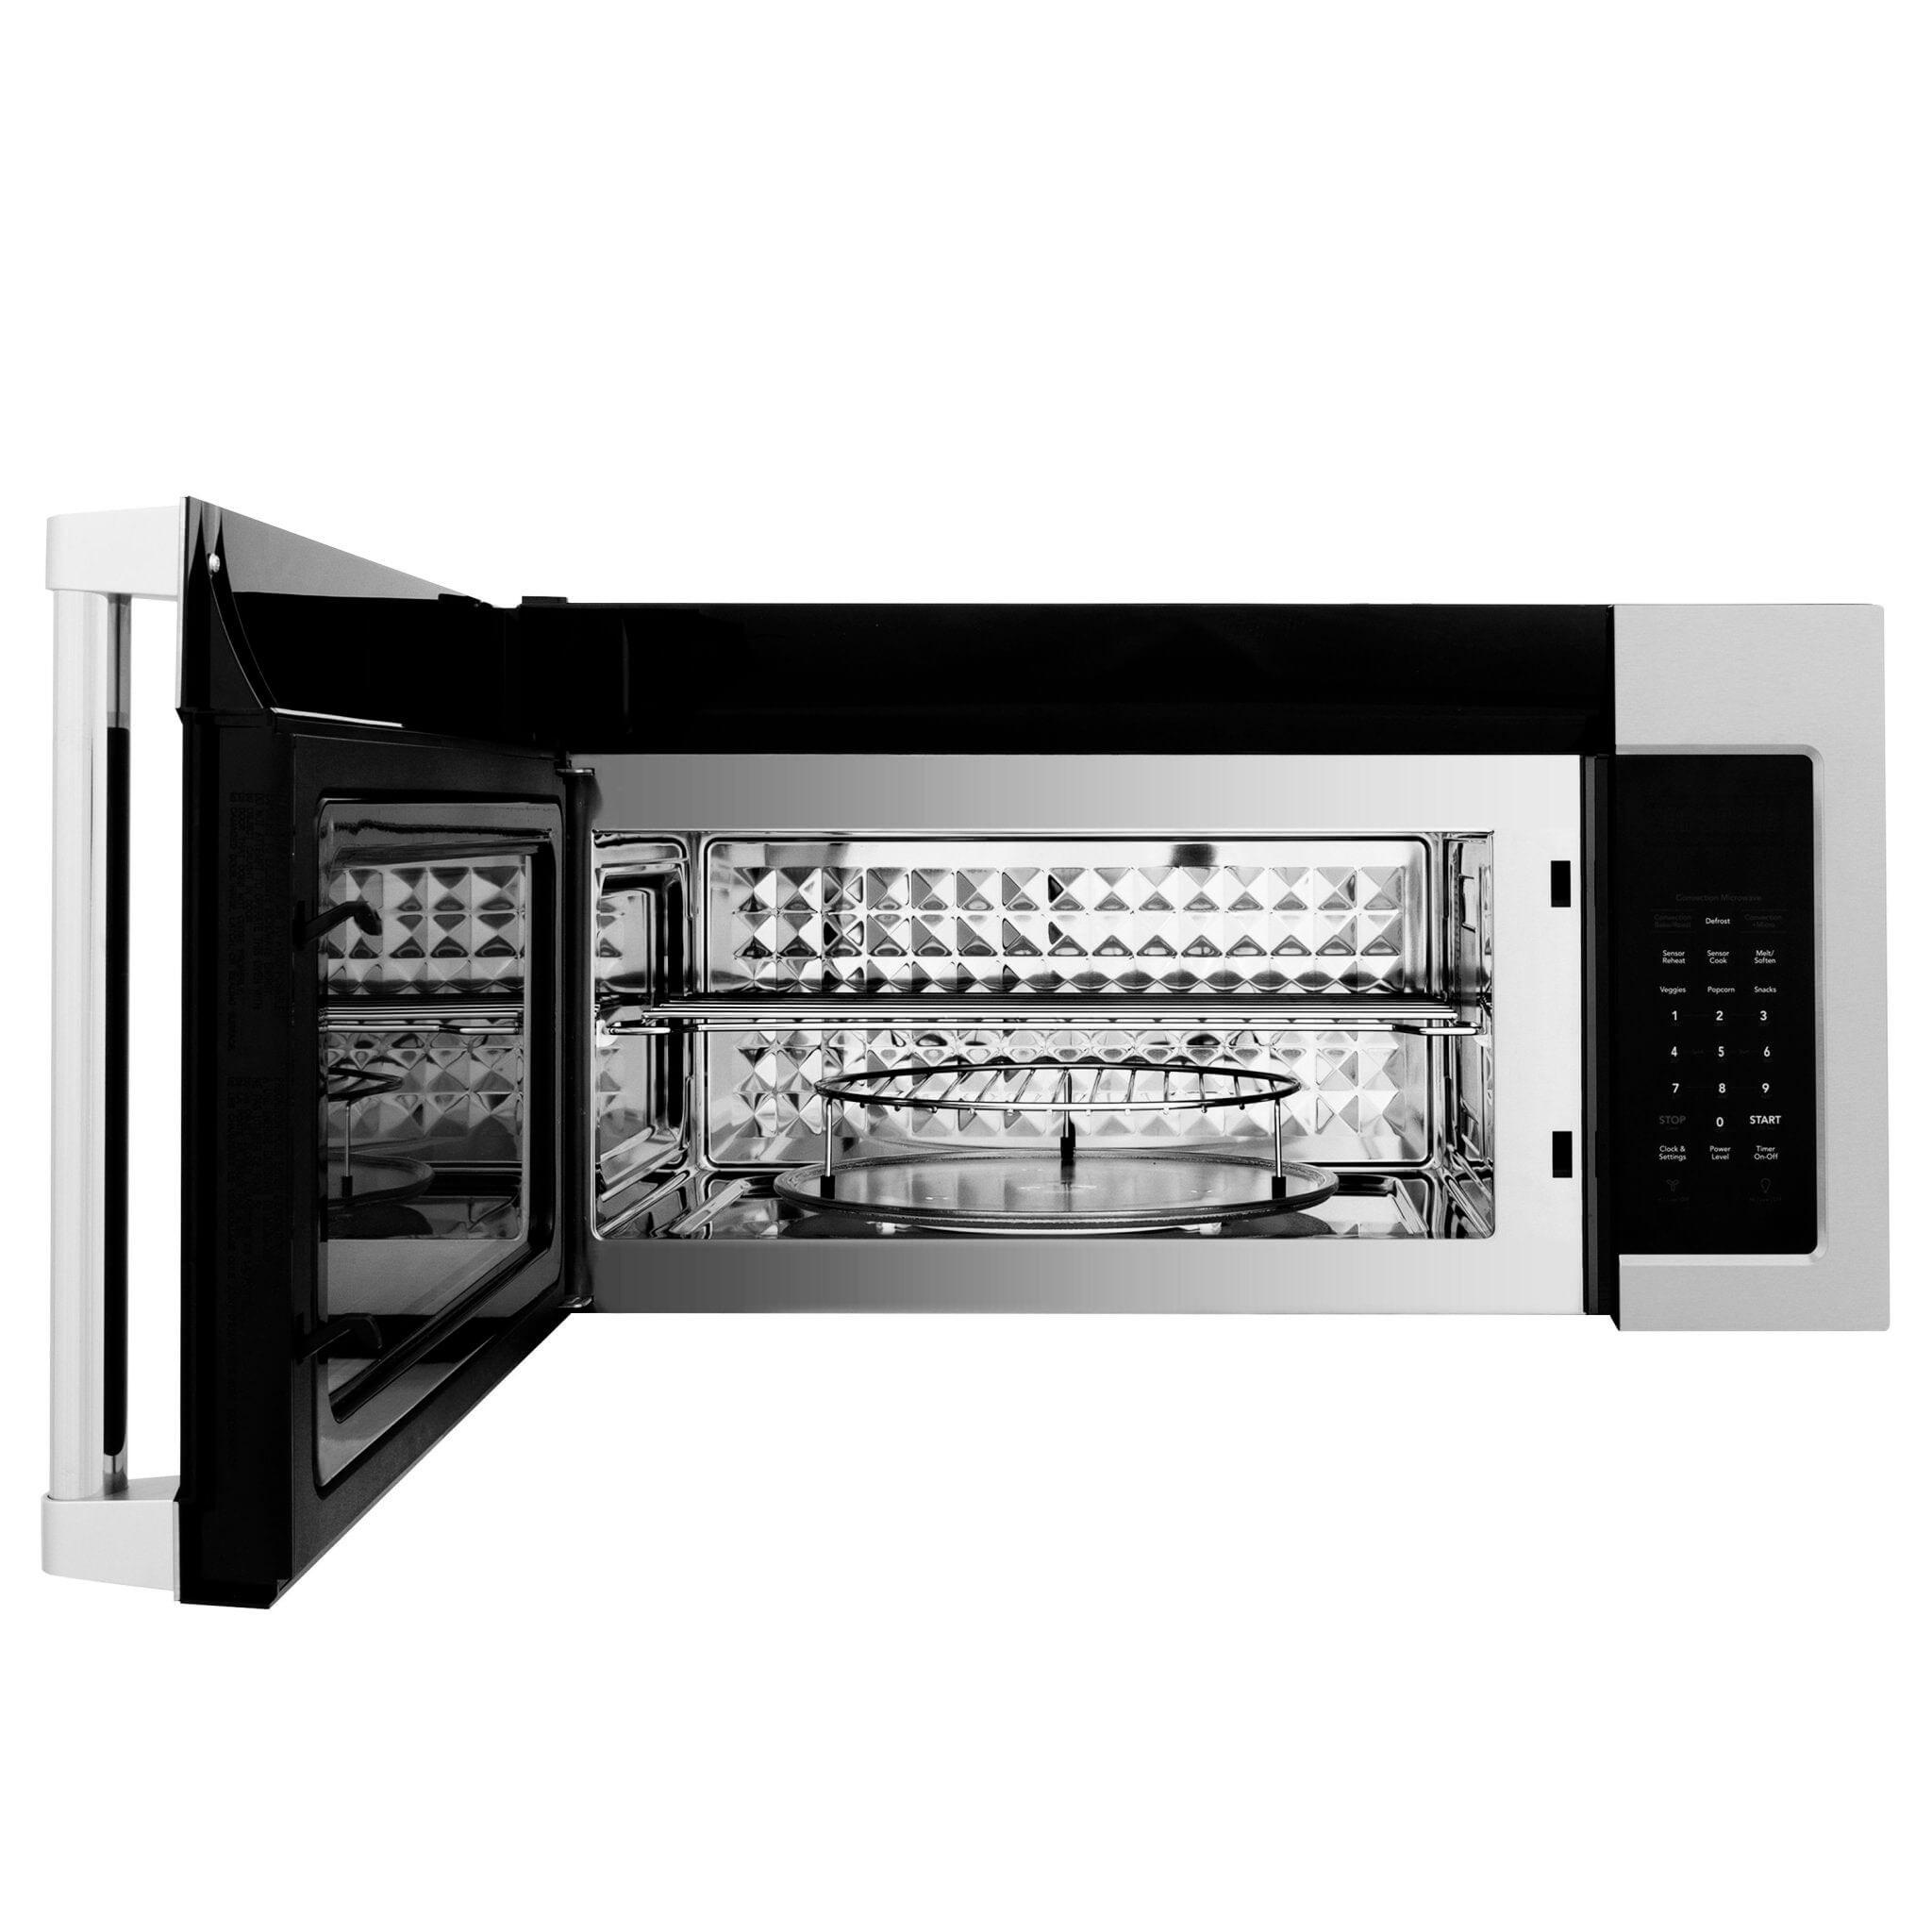 ZLINE's 30 inch over the range microwave (MWO-OTR-H-30) includes a Convection Rack to Achieve maximum convection performance with an included microwave rack designed to provide golden-brown results